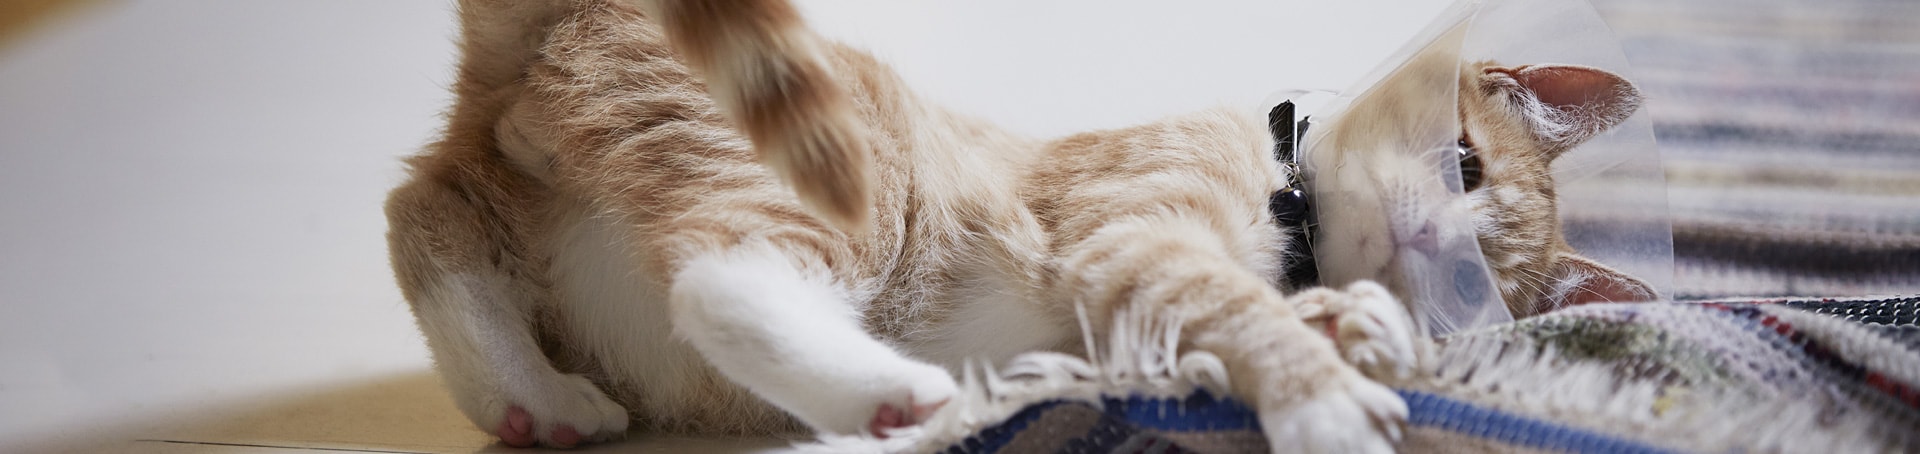 Advice on grooming your cat or dog at home